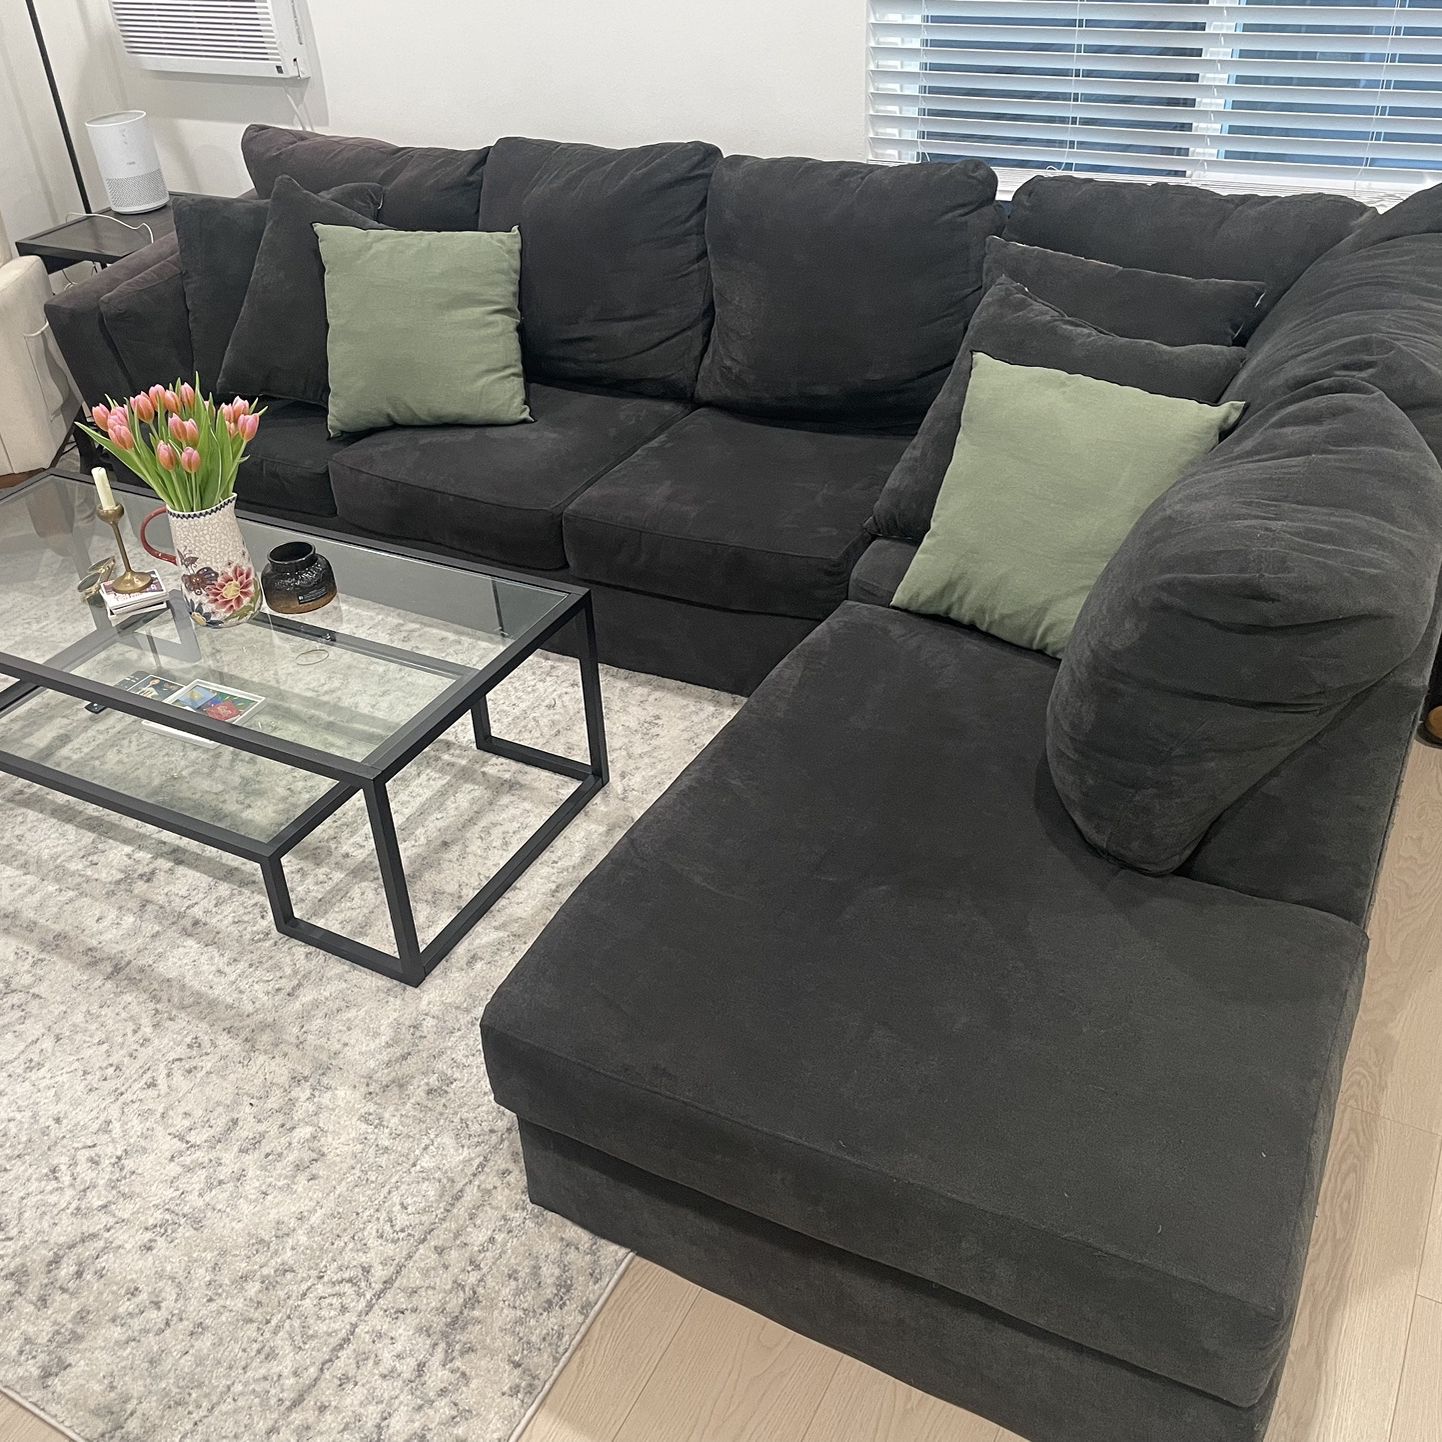 Large Black L Couch w/ Pillows